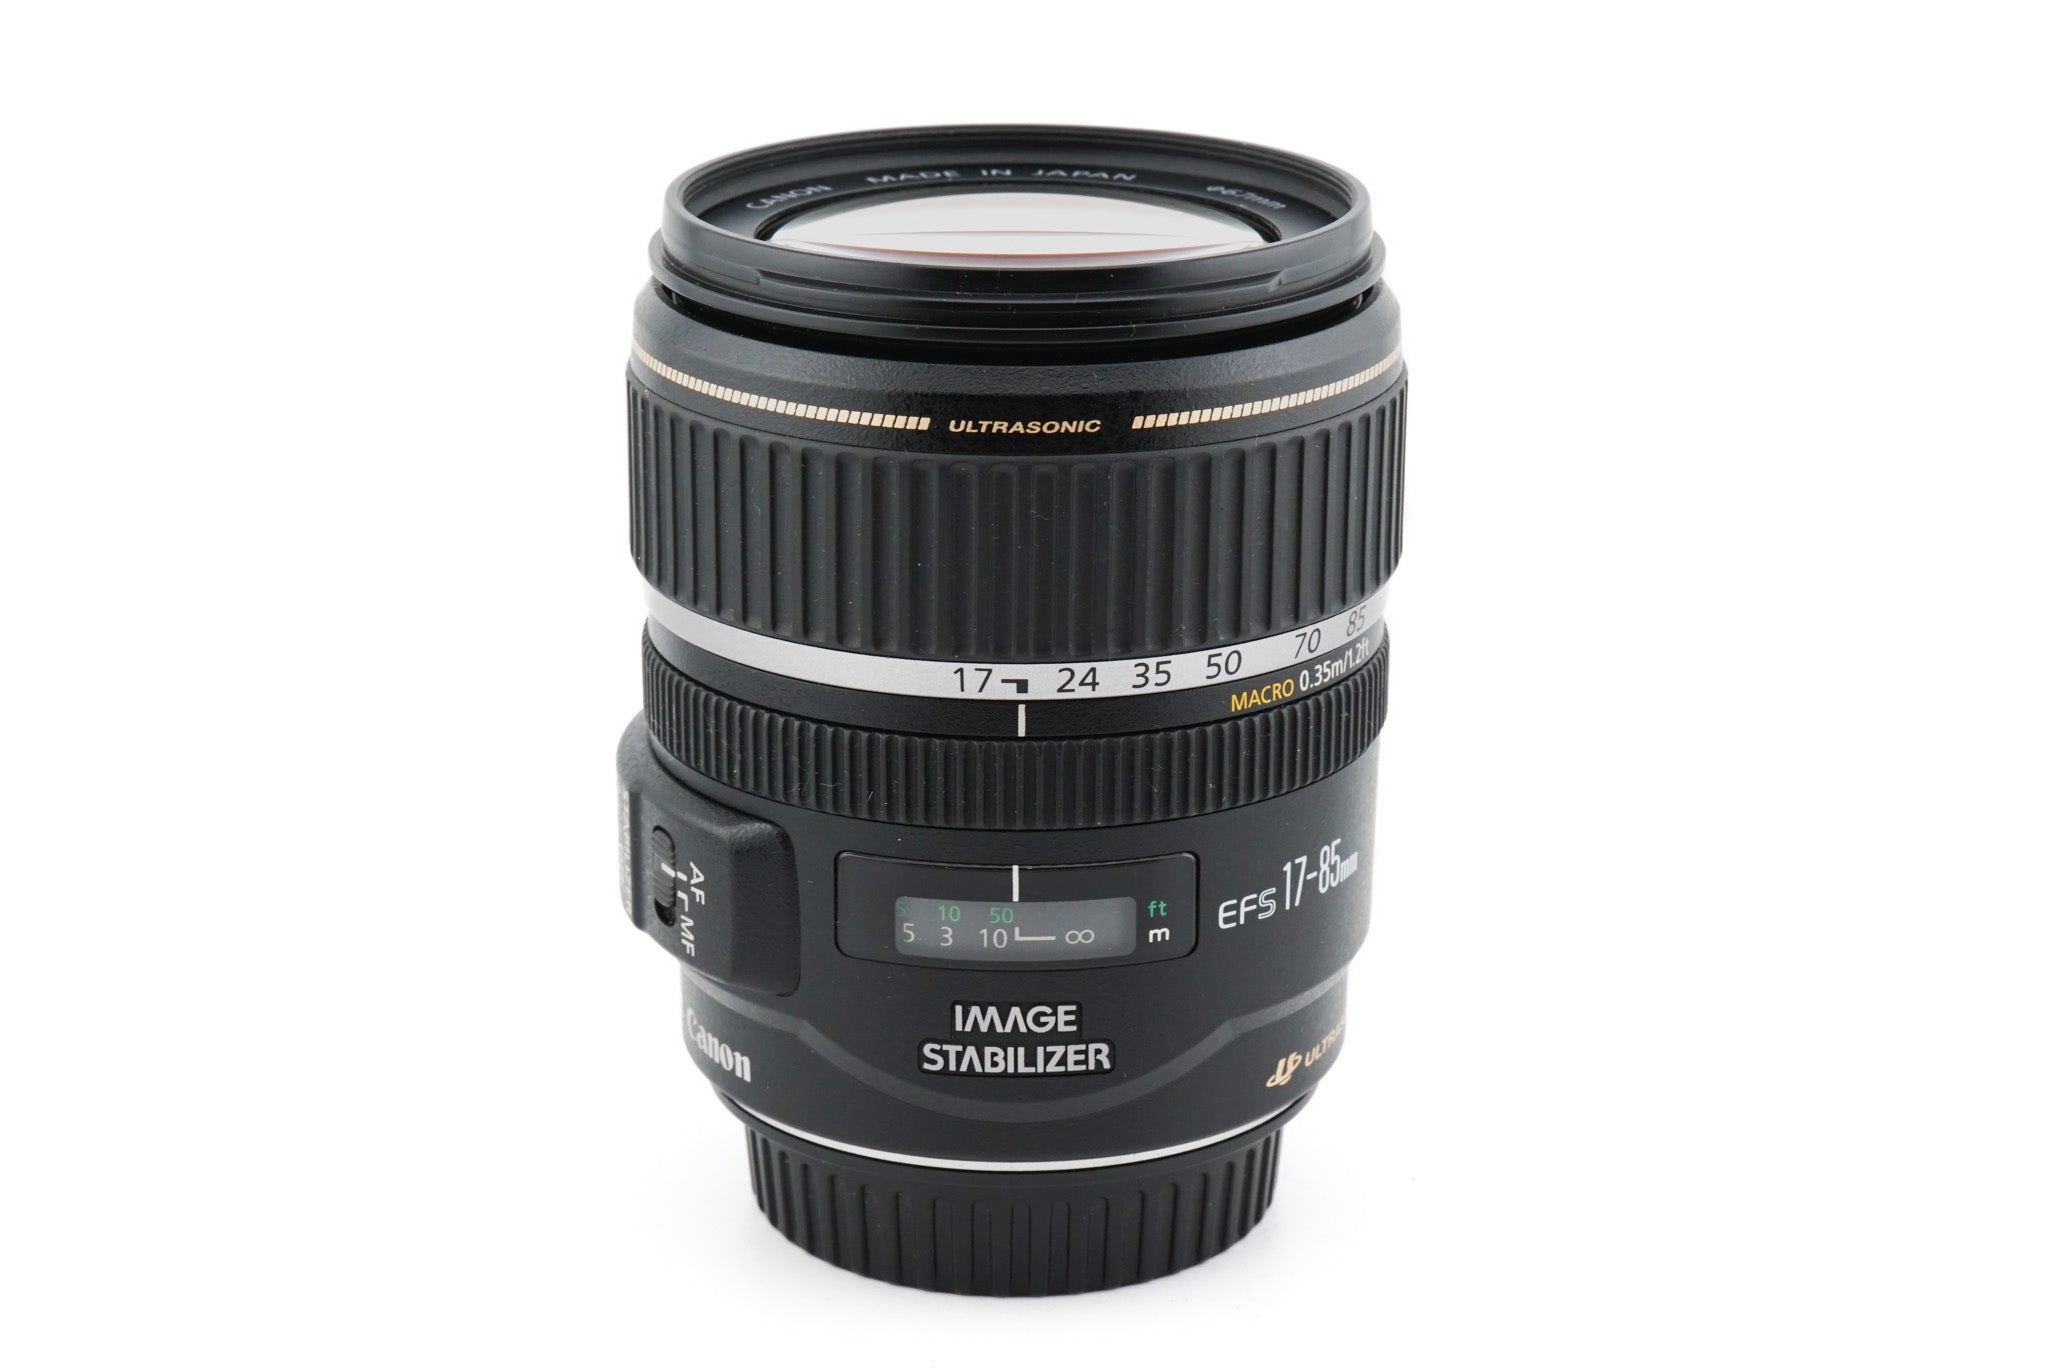 Canon 17-85mm f4-5.6 IS USM - Lens